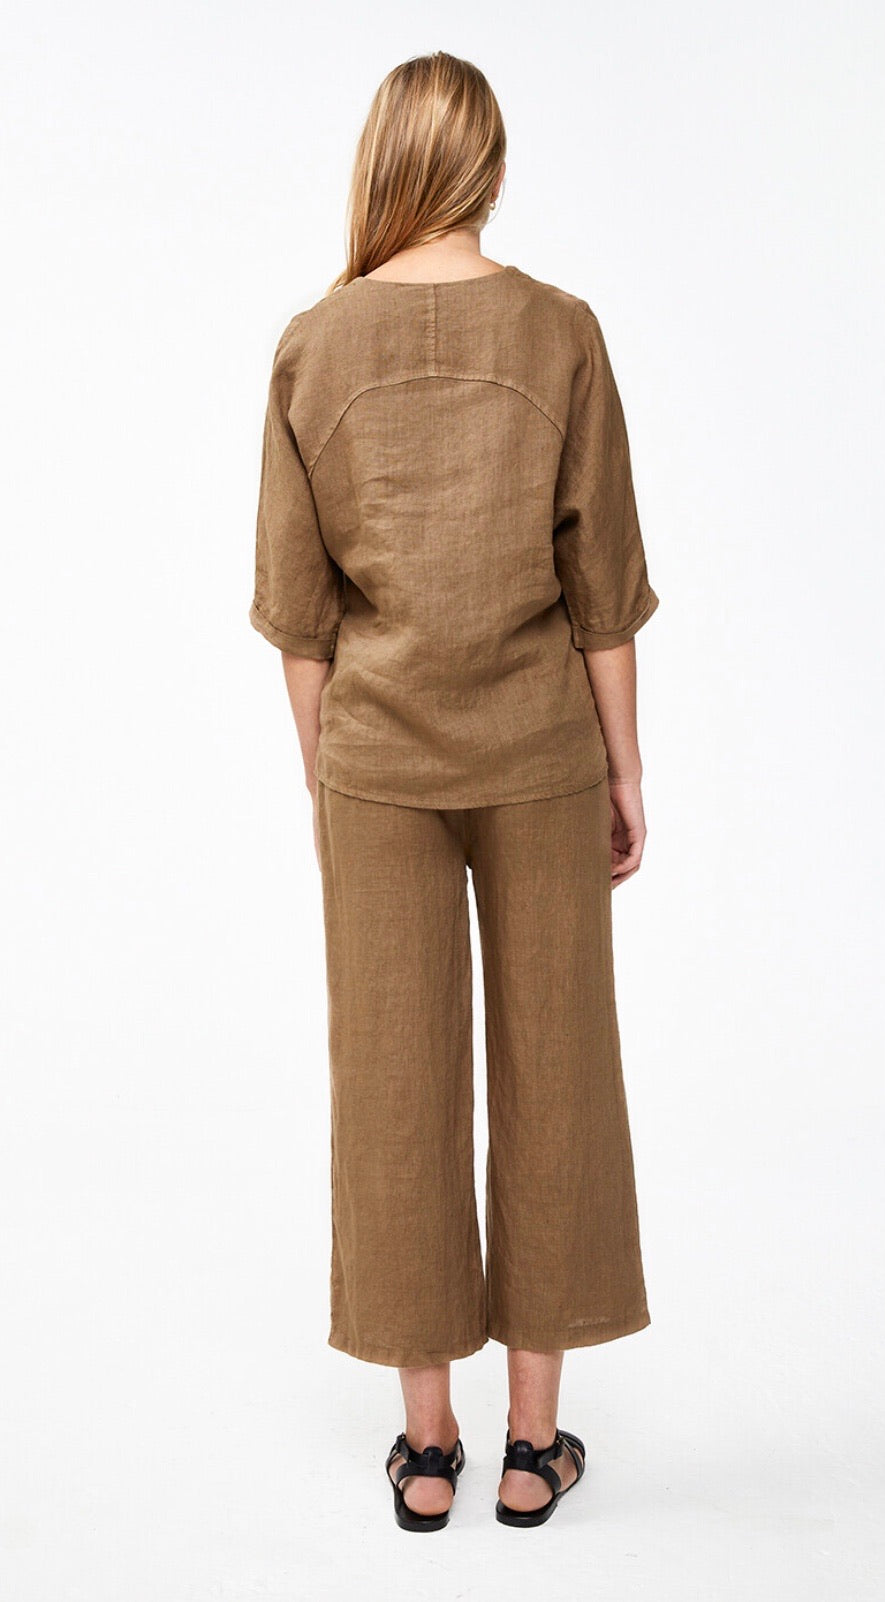 By-Bar Ines linen pant sepia